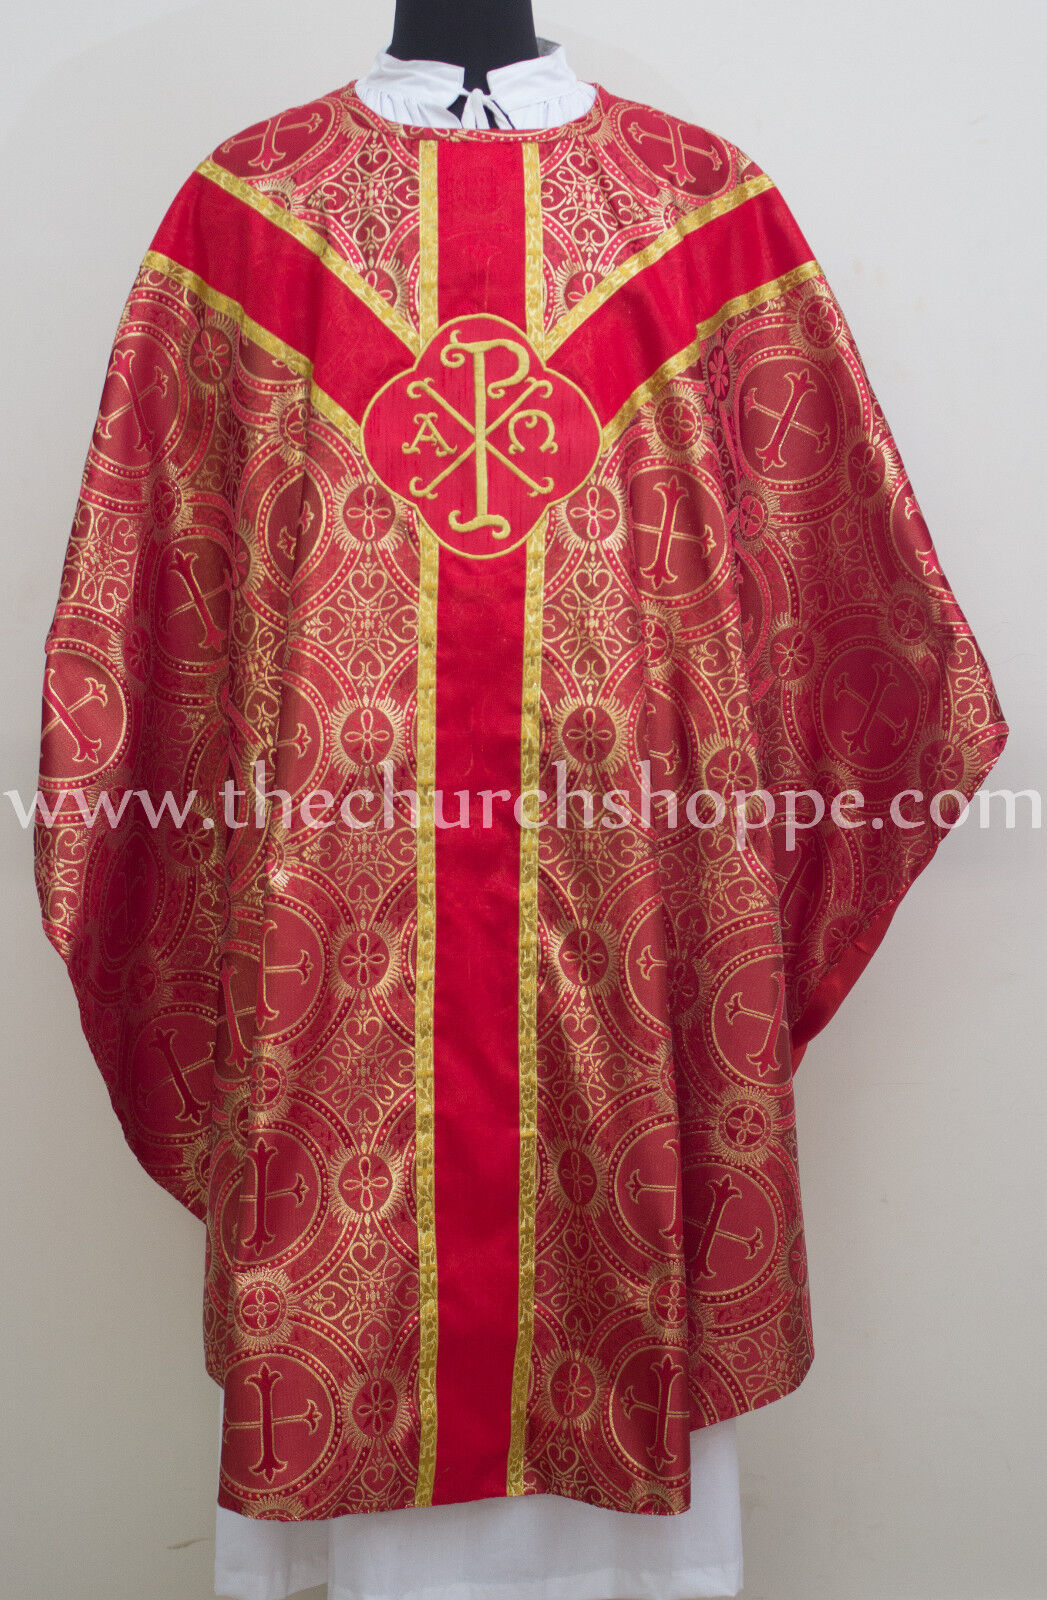 Gothic Red metallic vestment & stole set Gothic chasuble,casula,casel,CASULLA